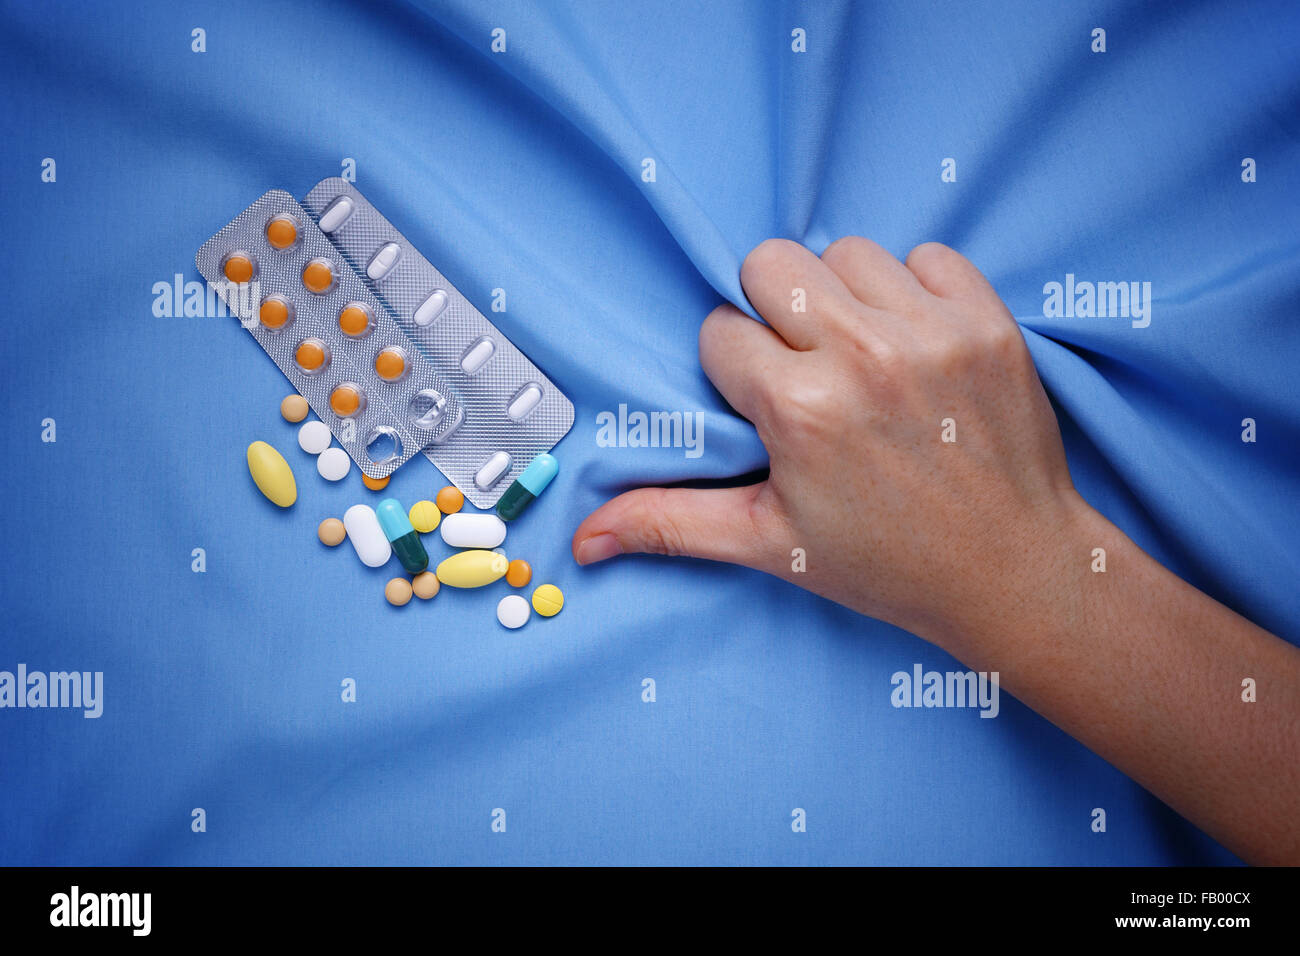 Closeup hand with pain and suffer from illness with medicine pills Stock Photo